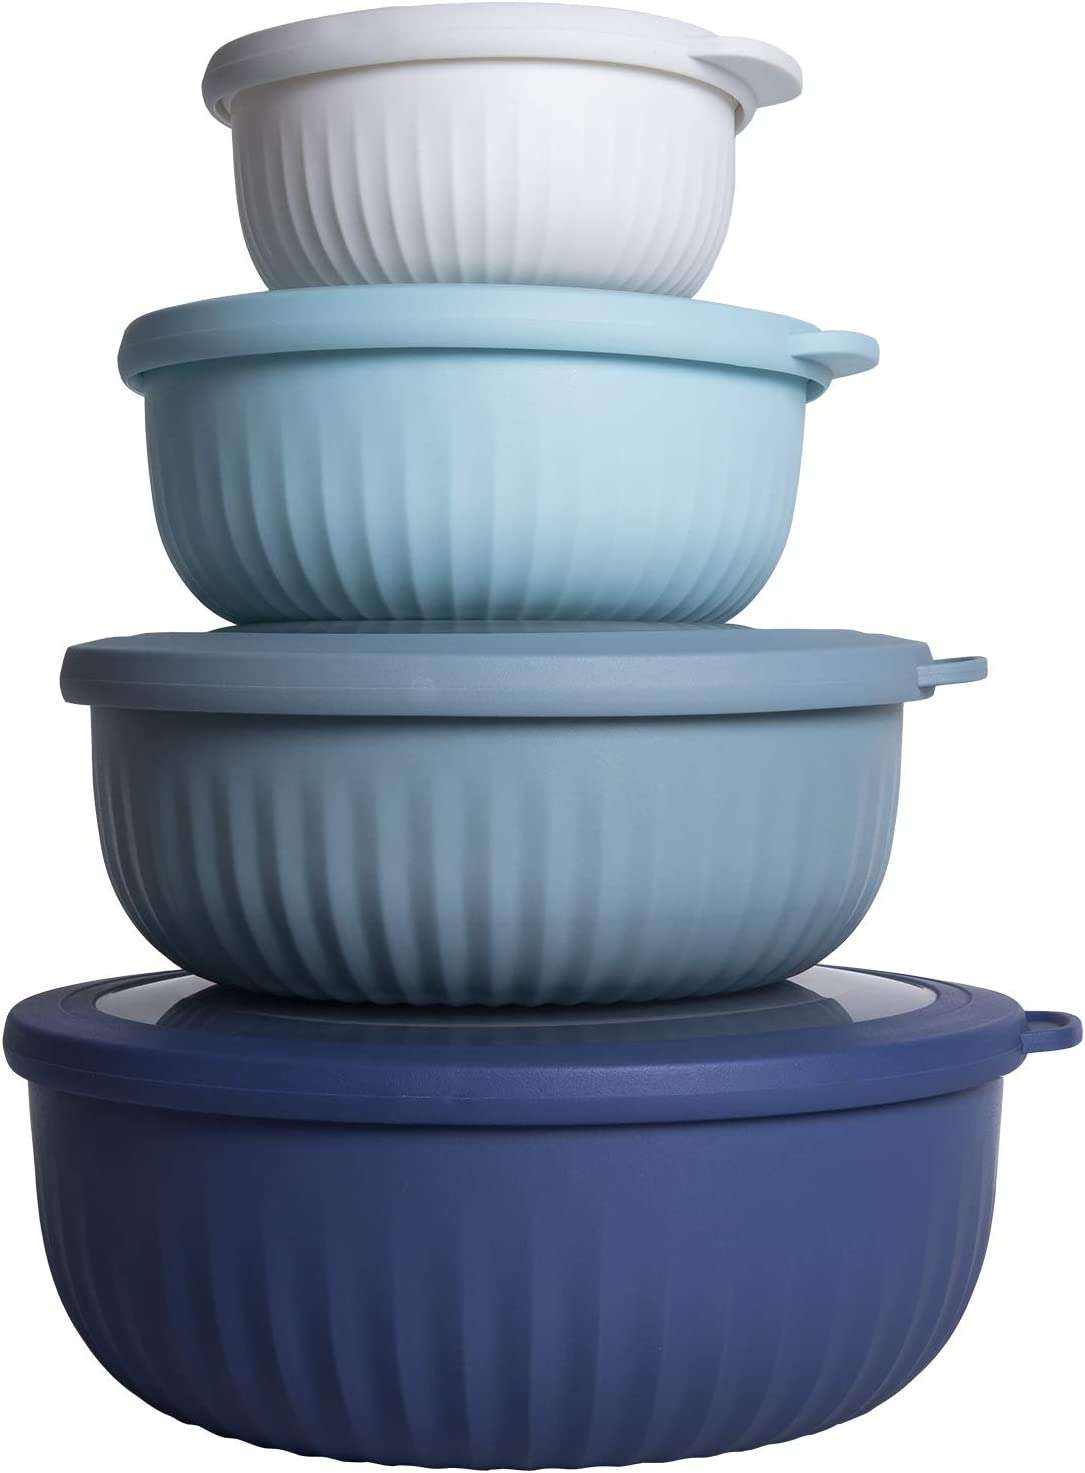 5. Cook With Color Mixing Bowls